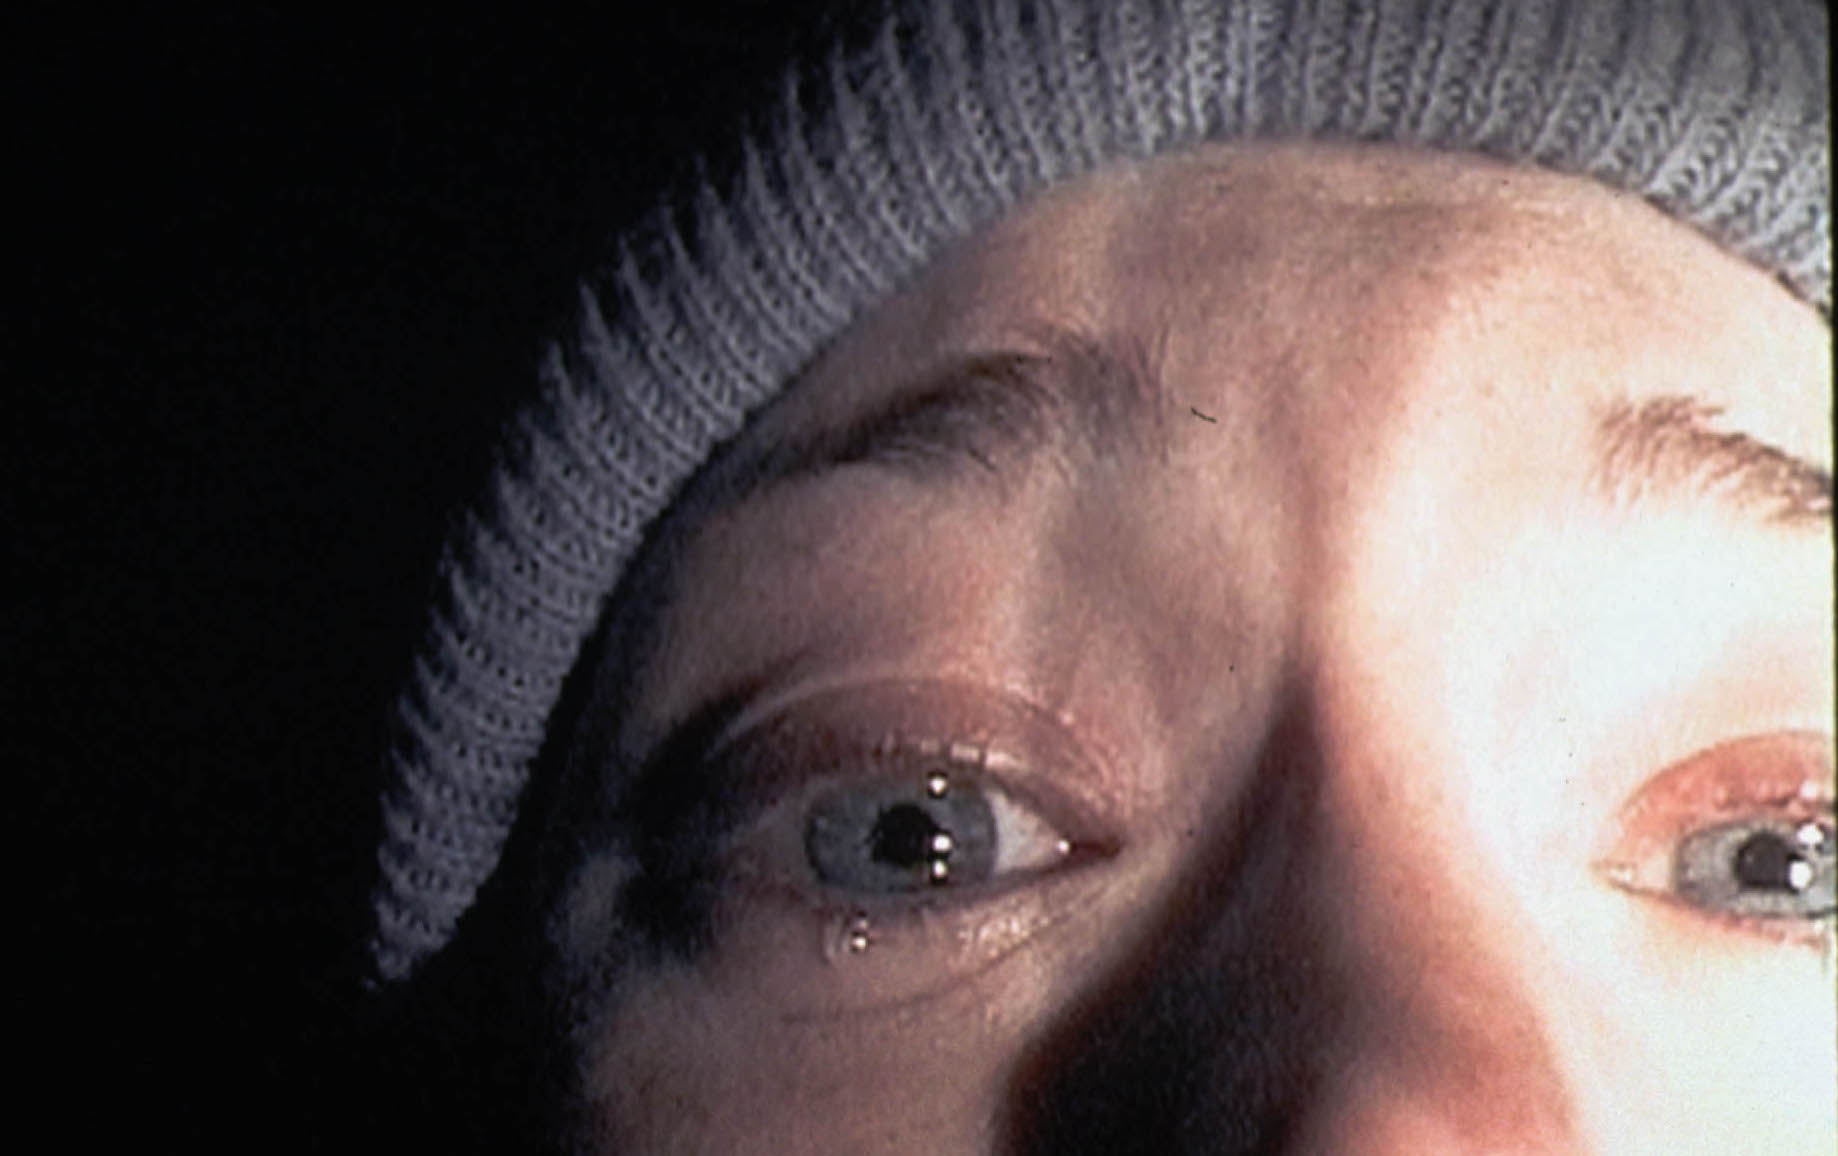 Actor from Original ‘Blair Witch Project’ Calls Out Lionsgate Over Remake: 25 Years of Disrespect